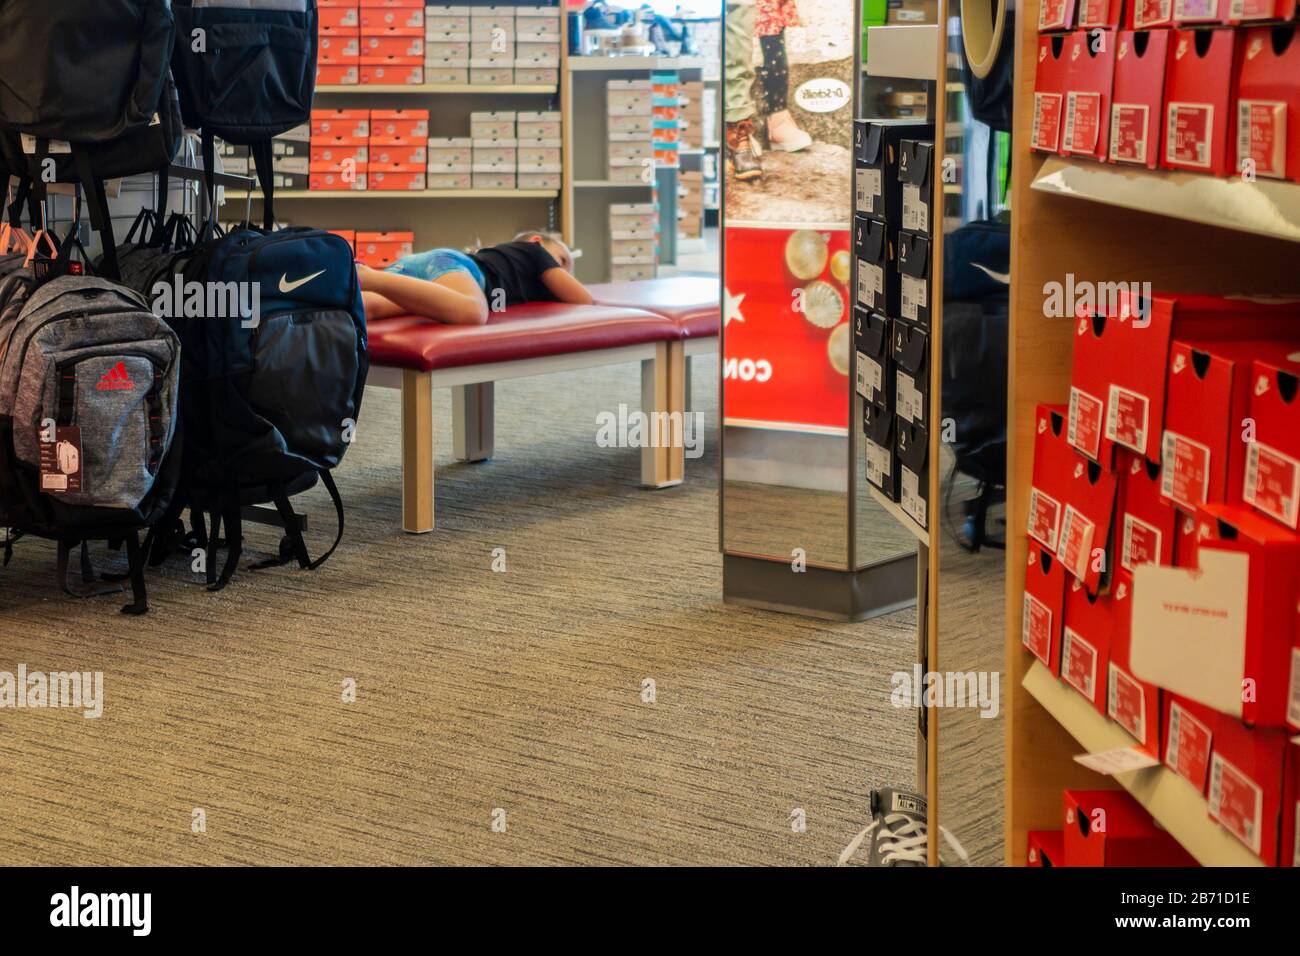 Famous Footwear interior showing a rack of Nike and Adidas backpacks and aisles of boxed shoes. USA Stock Photo